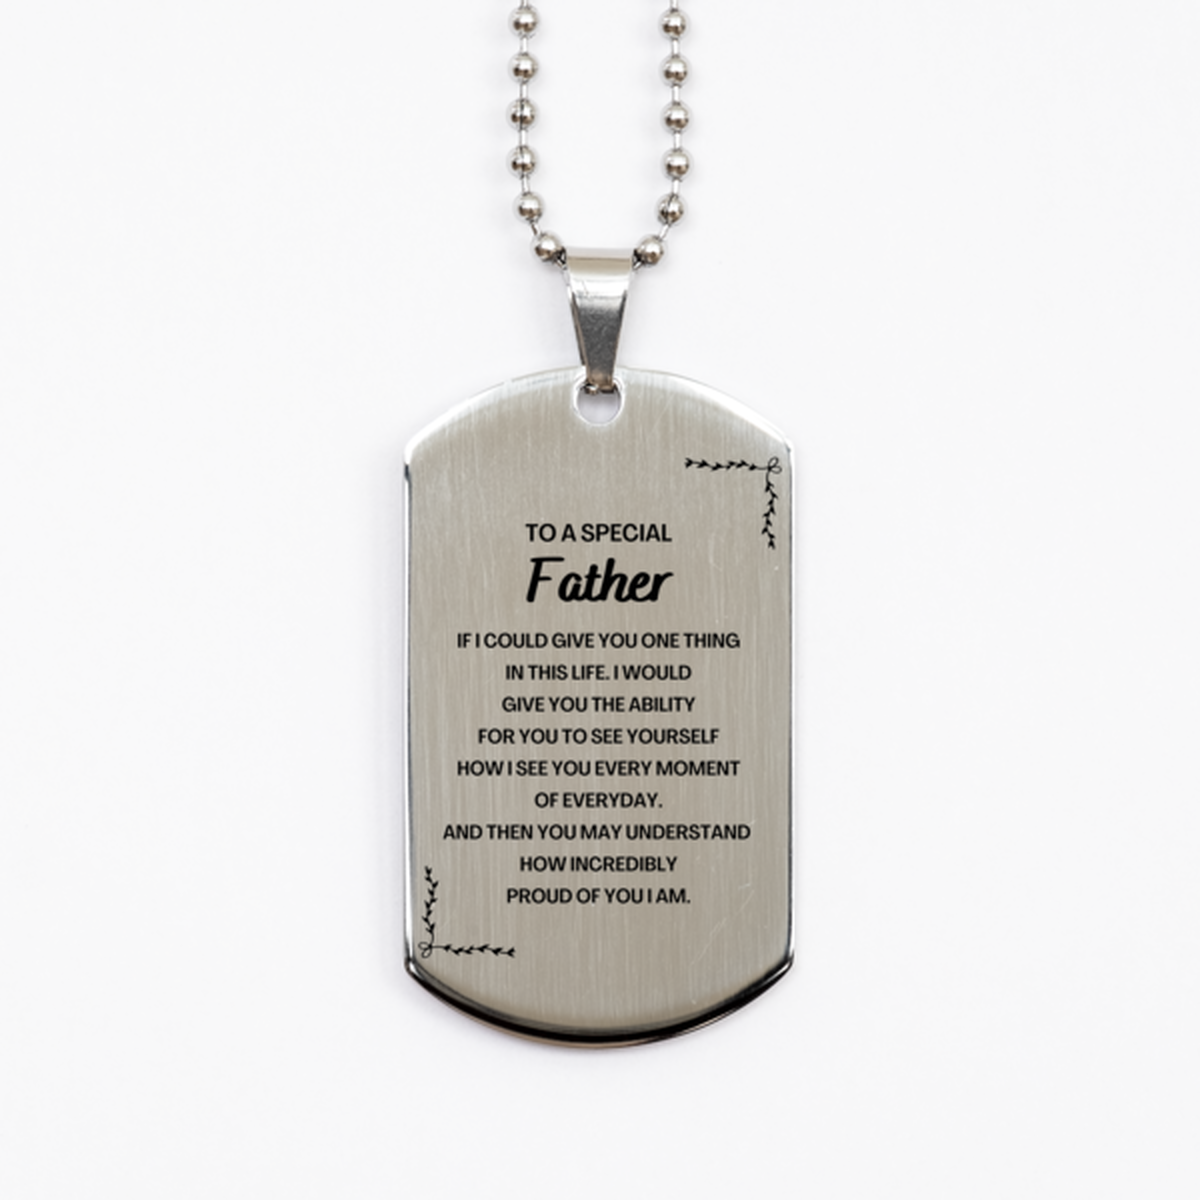 To My Father Silver Dog Tag, Gifts For Father Engraved, Inspirational Gifts for Christmas Birthday, Epic Gifts for Father To A Special Father how incredibly proud of you I am